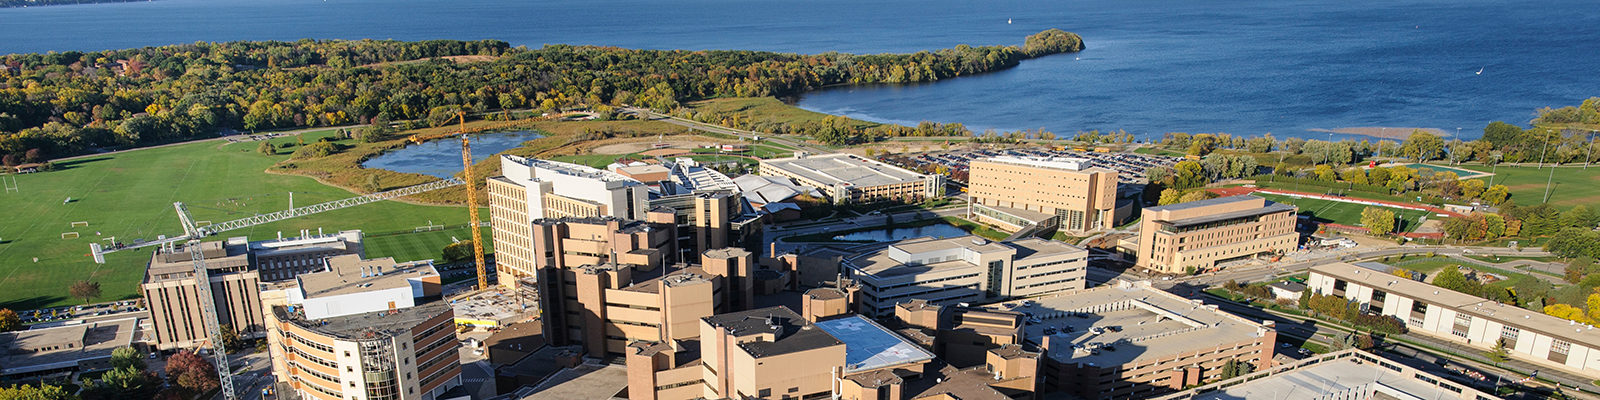 The medical area of the western side of the University of Wisconsin-Madison